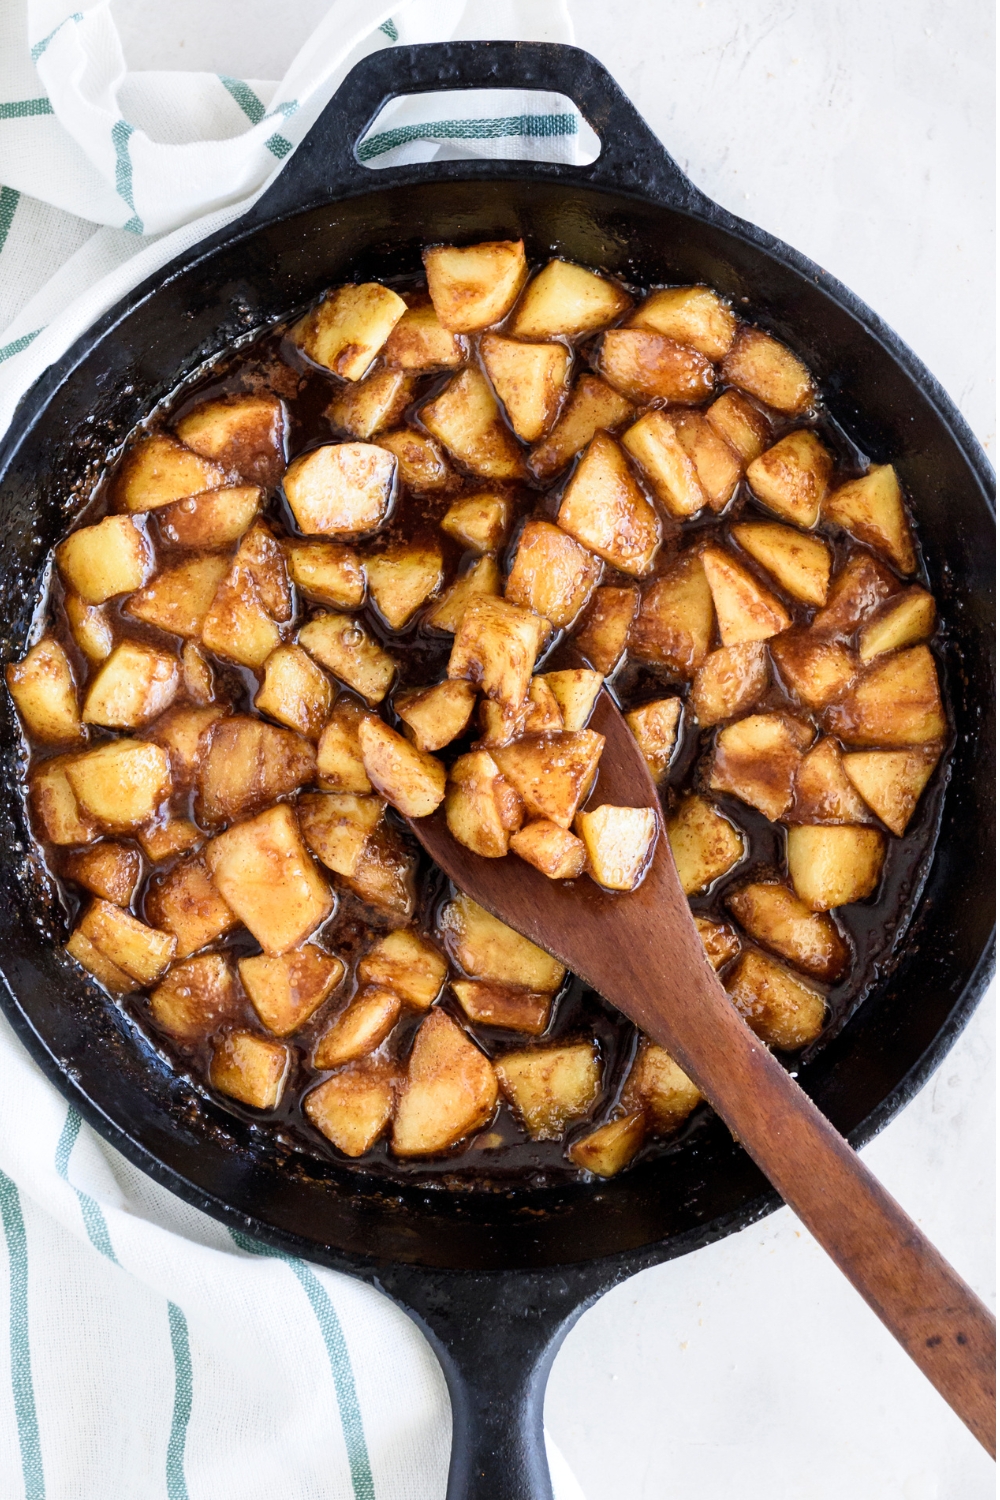 A cast iron skillet with fried apples and a wooden spoon stirring them.